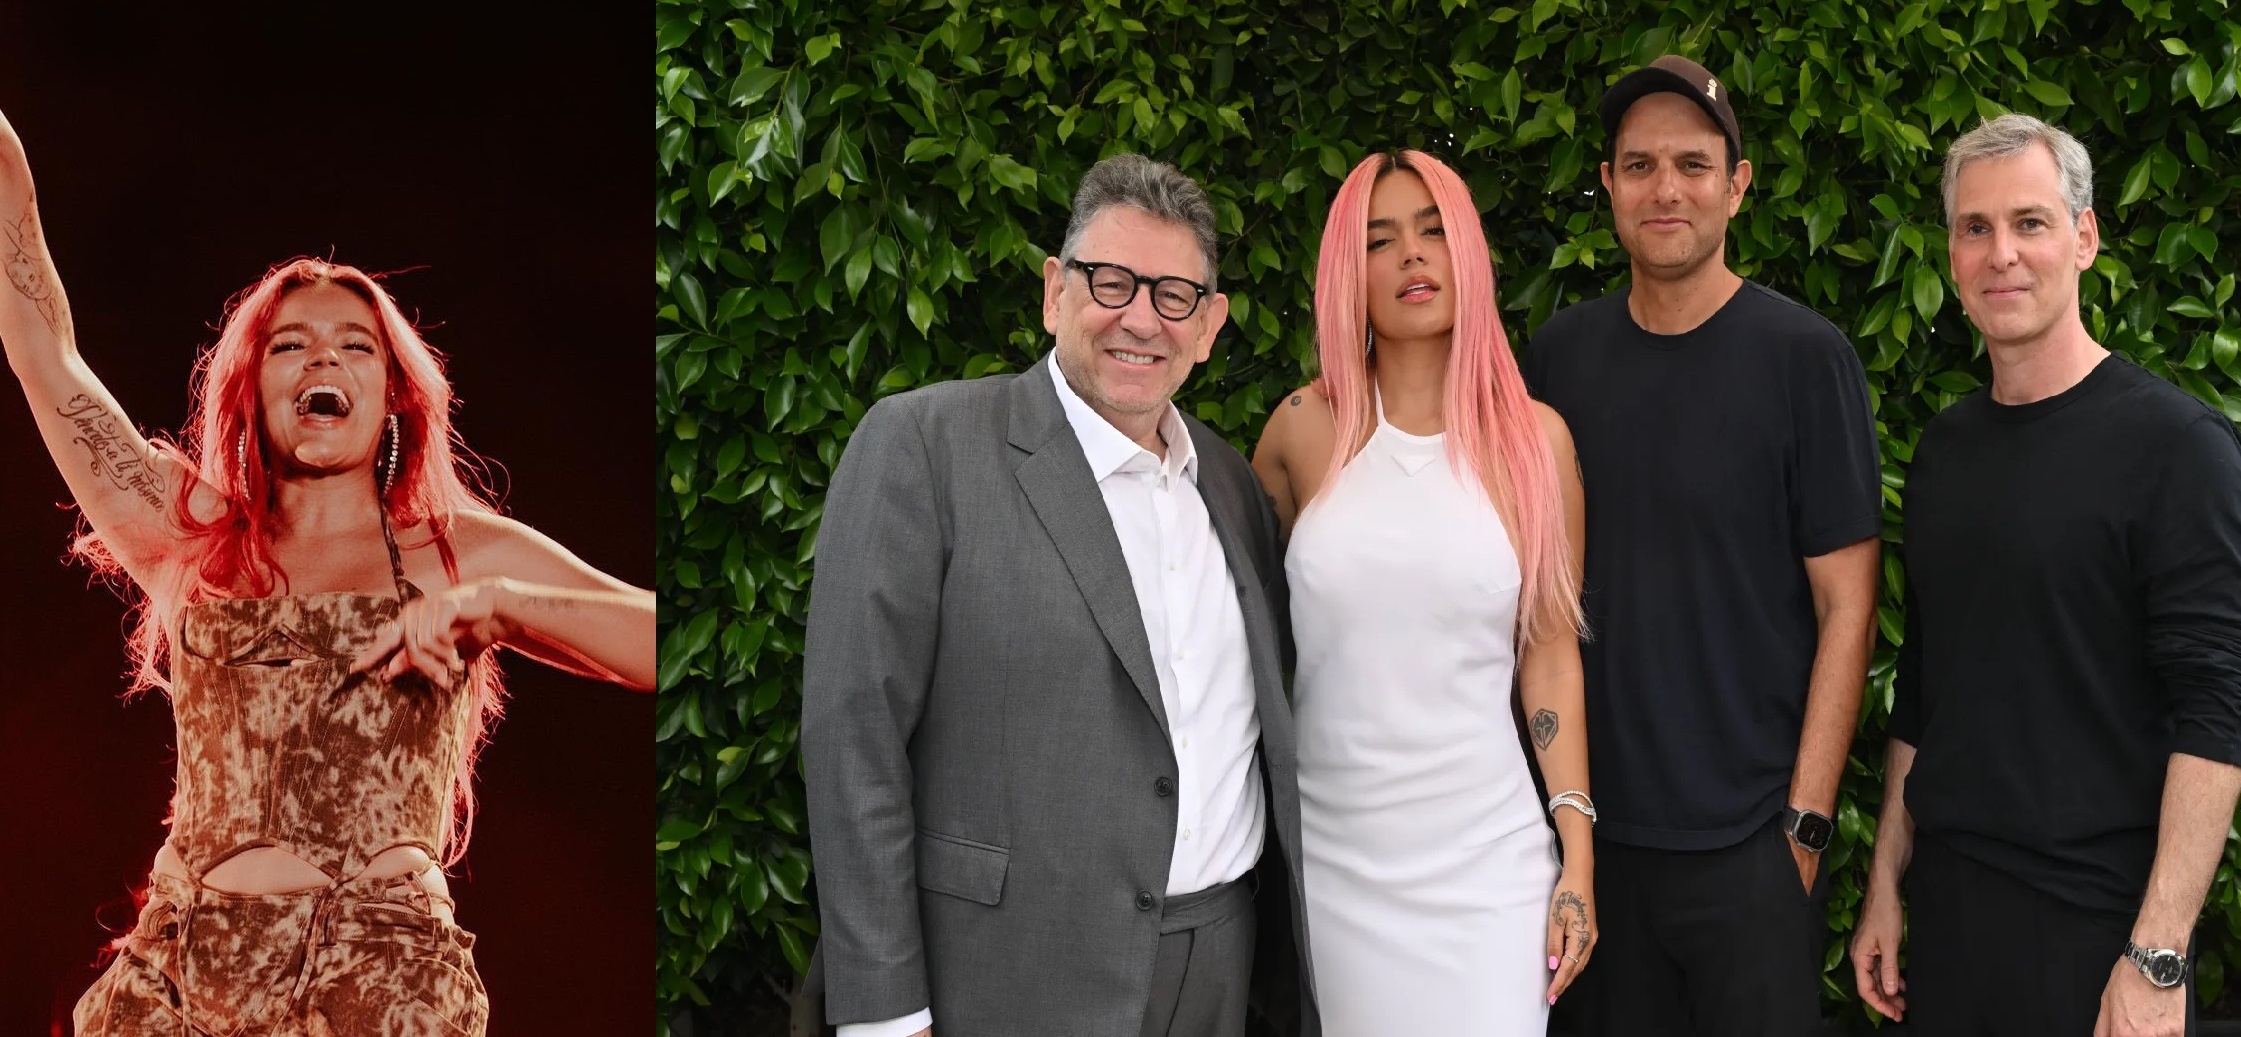 Karol G secures more years of musical career by signing with Interscope Records